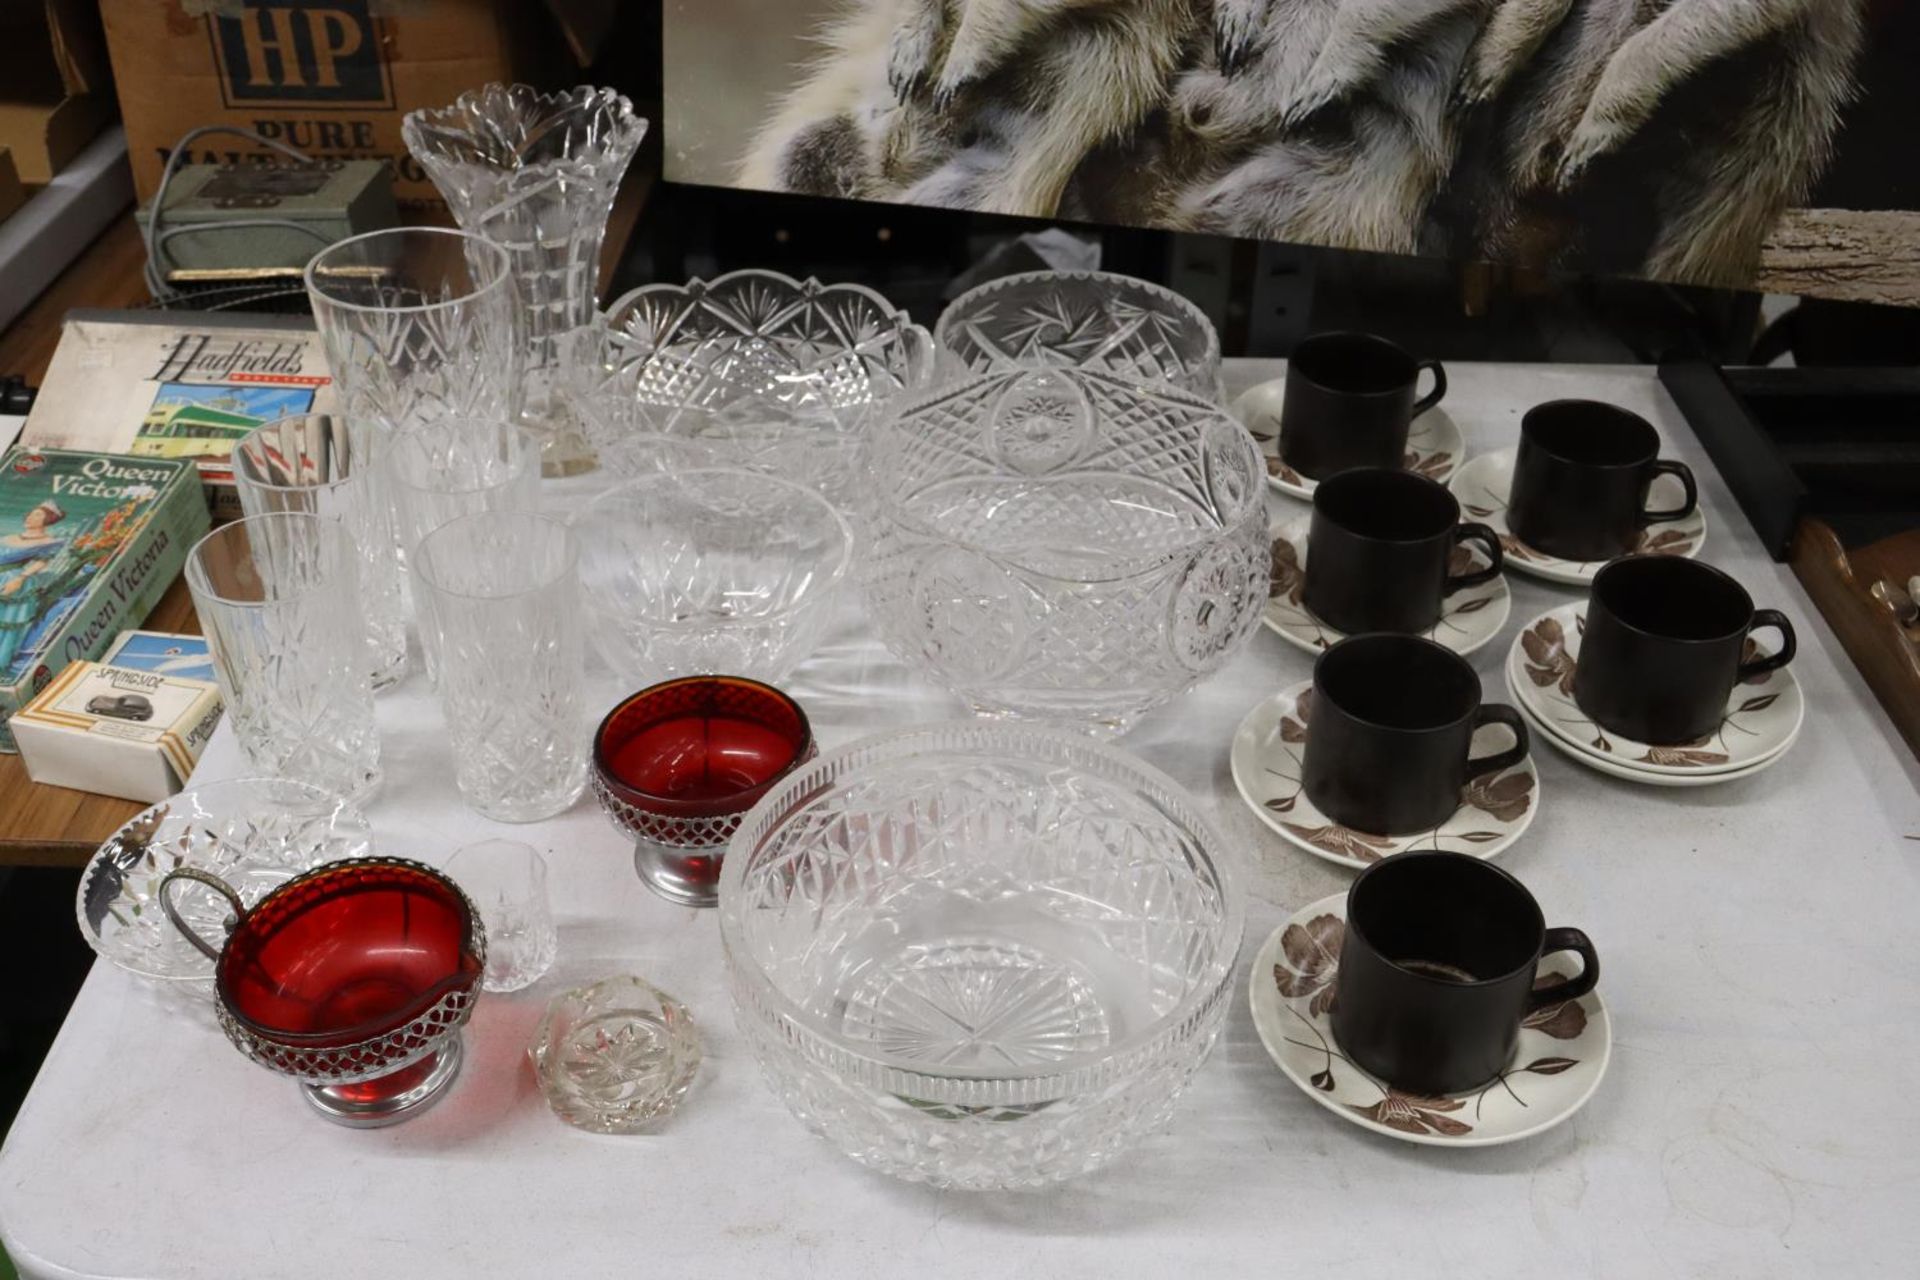 A LARGE QUANTITY OF GLASSWARE TO INCLUDE BOWLS, VASES, TUMBLERS, ETC PLUS SIX MEAKIN CUPS AND